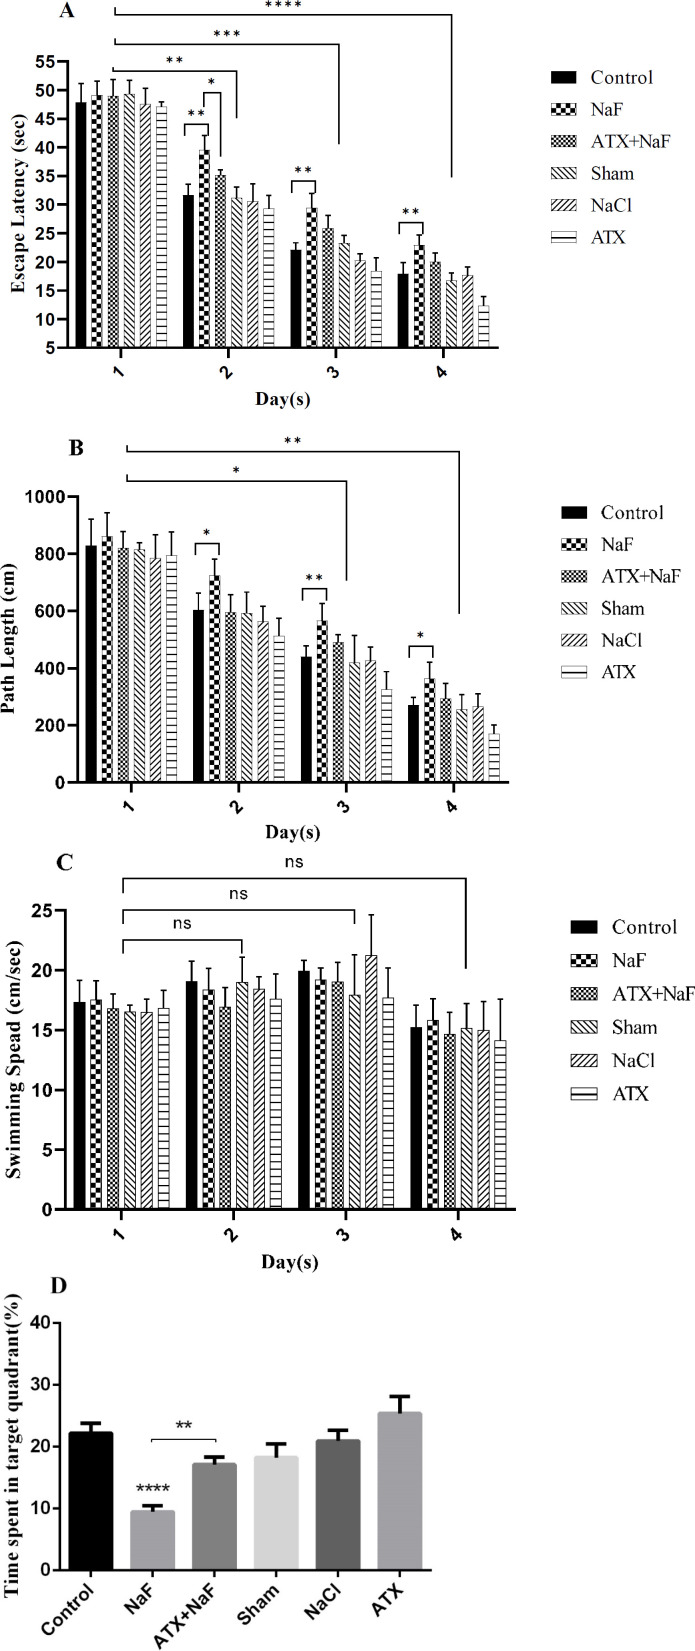 Effect of ATX administration on learning and memory changes induced by NaF using the MWM test. The mean value of path length (swimming distance), escape latency (time for finding a hidden platform), and swimming speed (velocity) during four continuous trial days in all treated and control groups are represented in A, B, and C, respectively. (D) The time spent in the target quadrant (%) was assessed by a probe test. The rats were treated with 270 ppm NaF alone (NaF), 25 mg/kg bw/day ATX pretreated (ATX+NaF), and 25 mg/kg bw/day ATX alone (ATX). The control group received no treatment, while sham and NaCl groups were treated with olive oil and NaCl solution, respectively